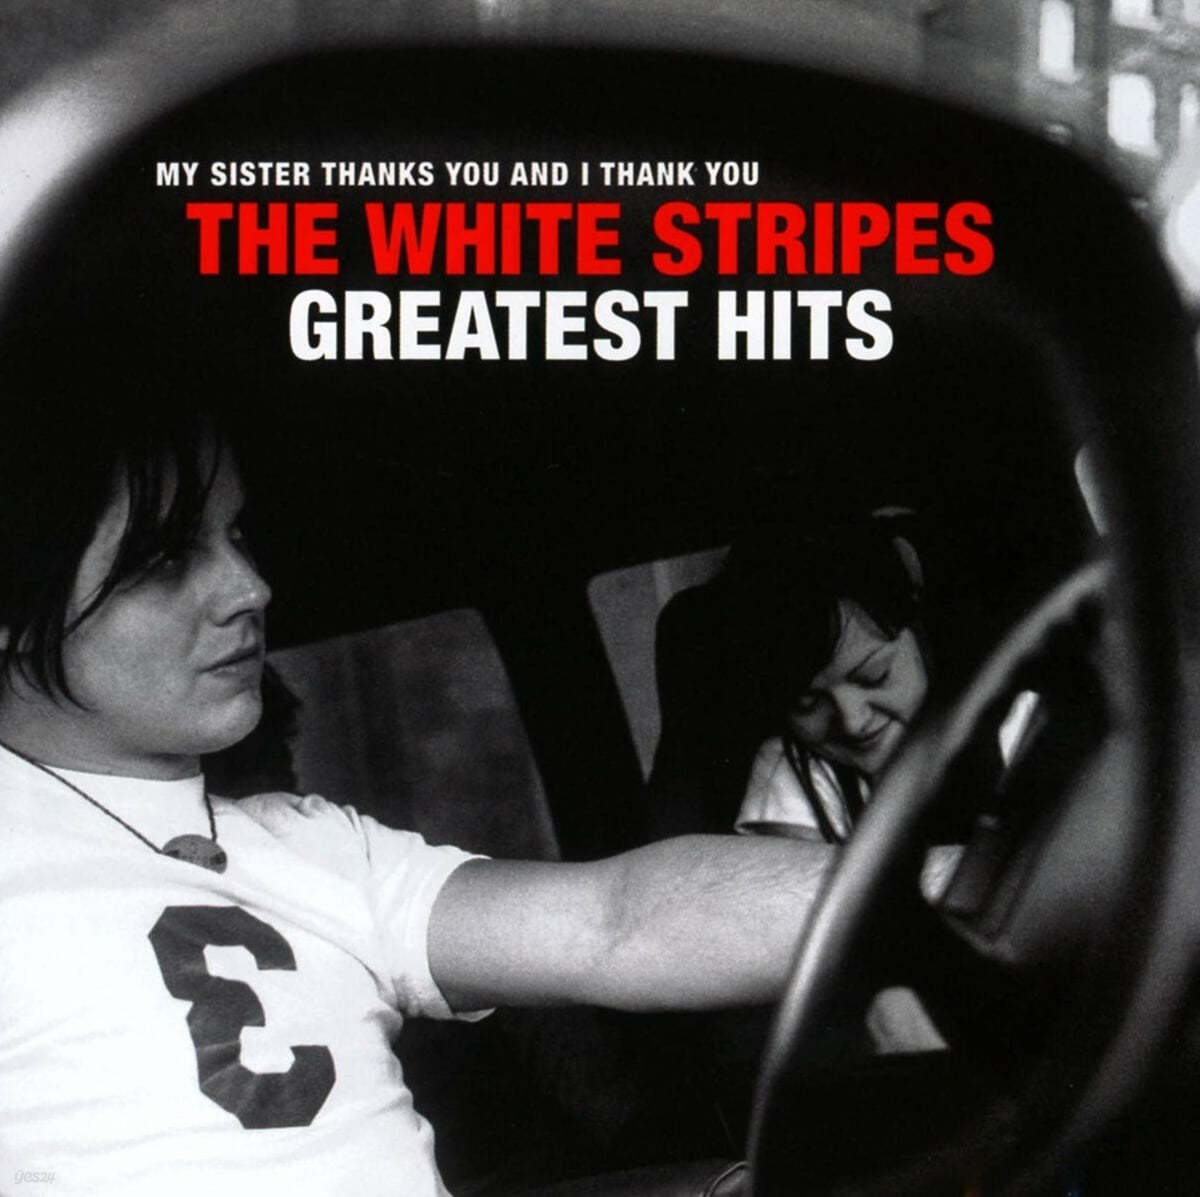 The White Stripes (화이트 스트라입스) - My Sister Thanks You And I Thank You: The White Stripes Greatest Hits 